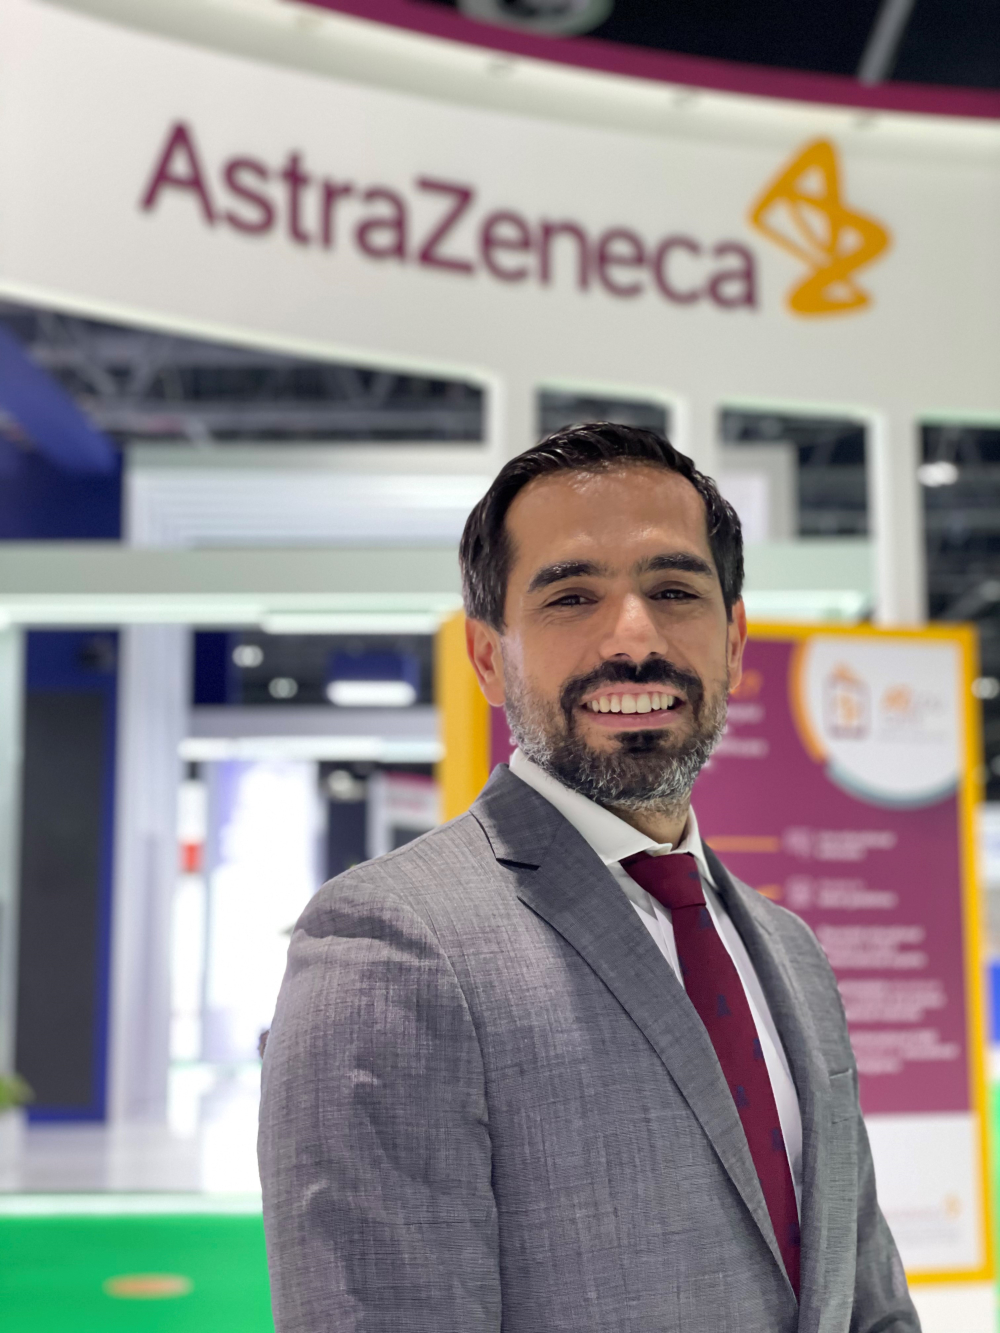 AstraZeneca praises UAE for vaccination rollout and testing strategy